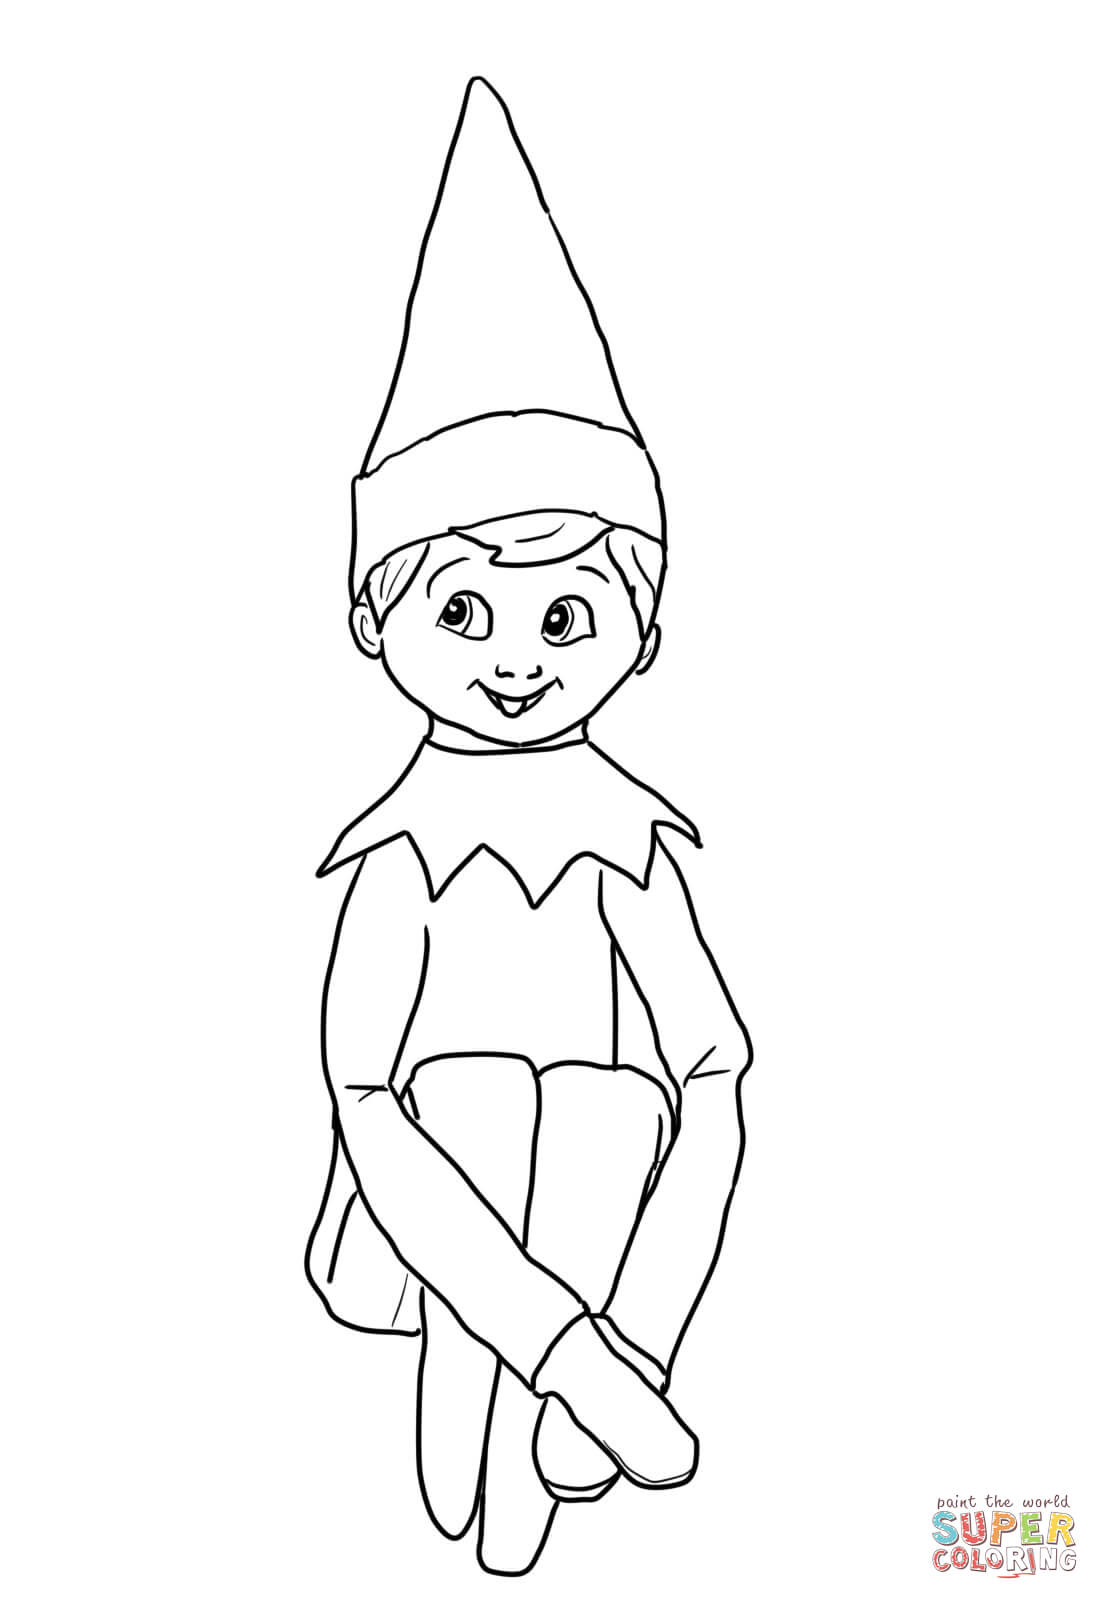 Elf  black and white elf on the shelf clipart cliparts databases